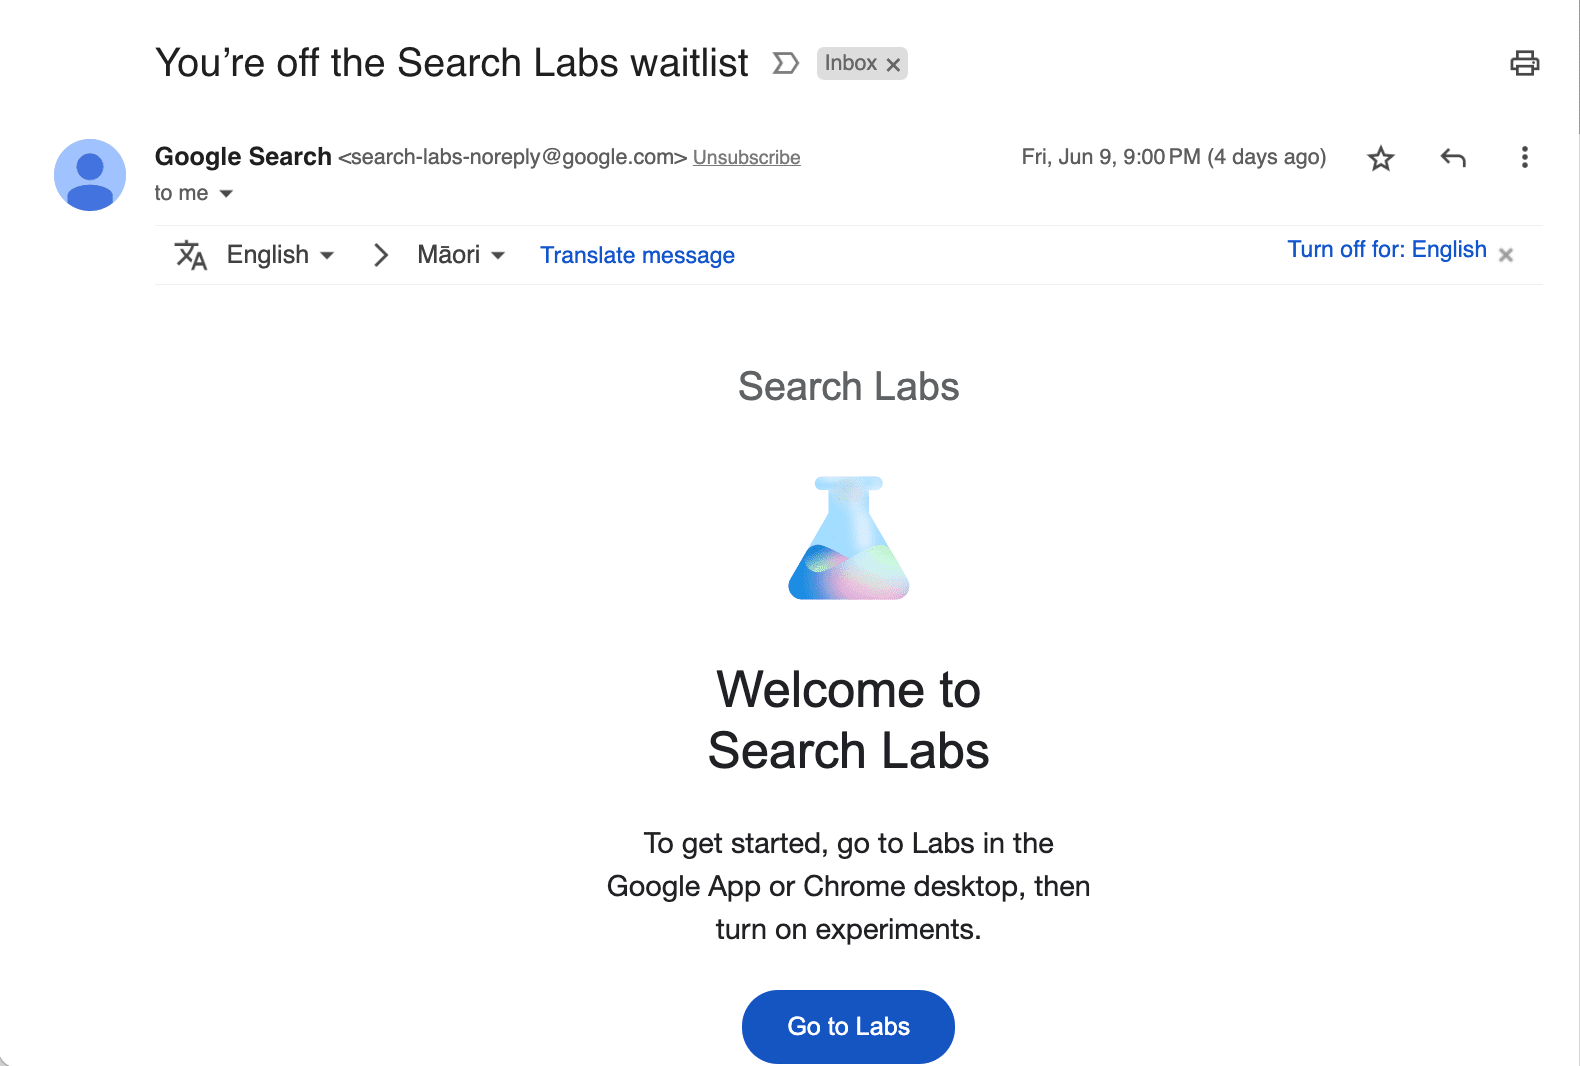 Welcome email from Search Labs